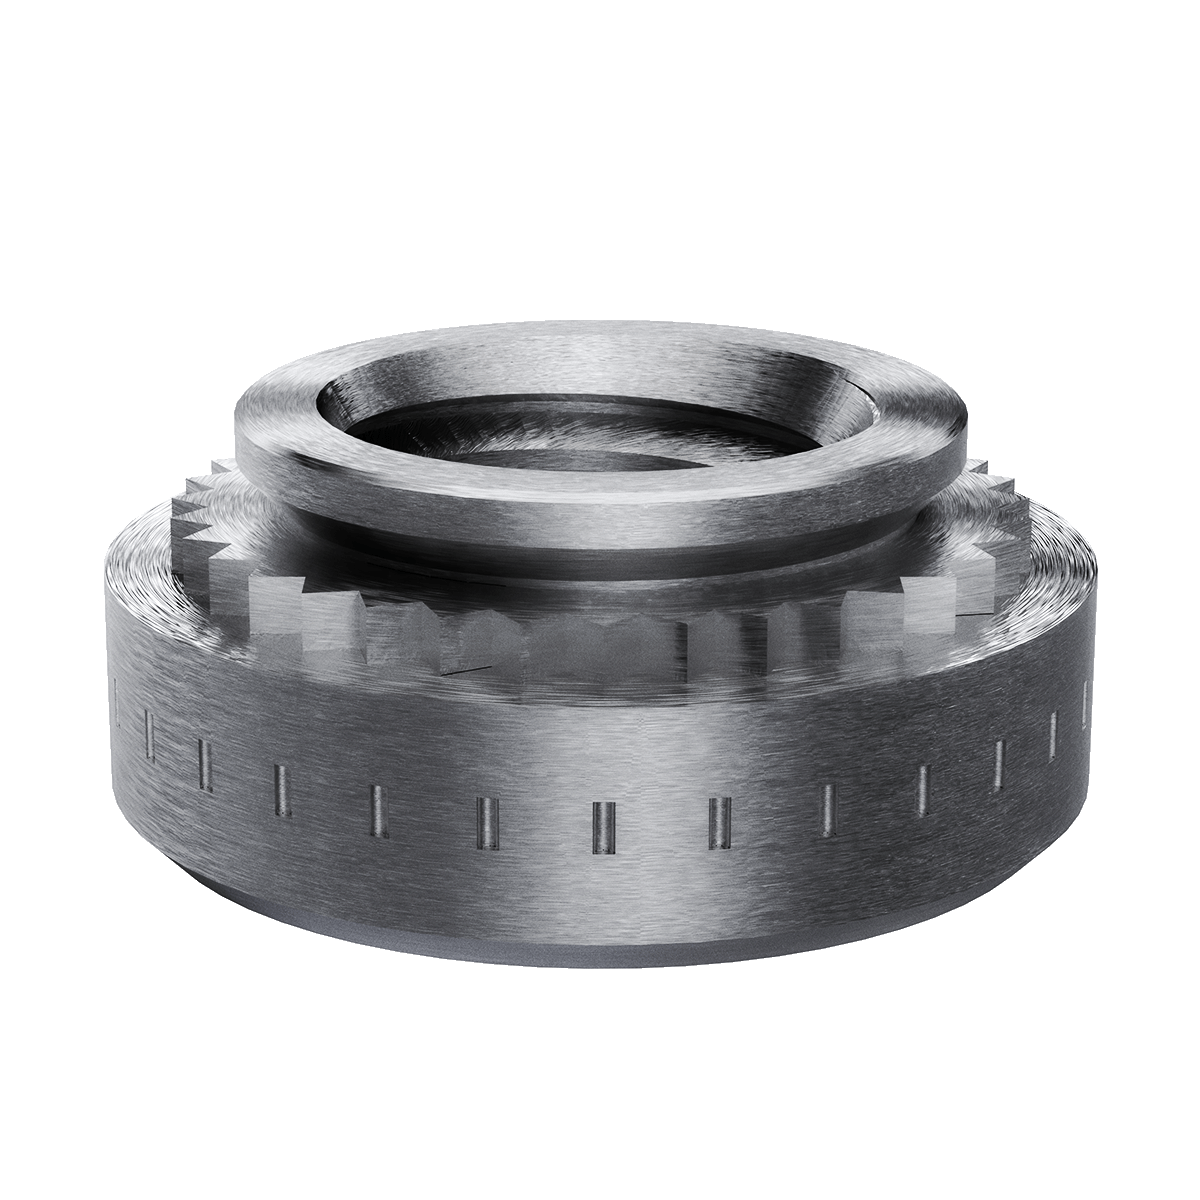 Self-Clinching Nut, For SS, 17-4 Stainless Steel, Passivated, Metric, M3x0.5 x 2, 100 Pack